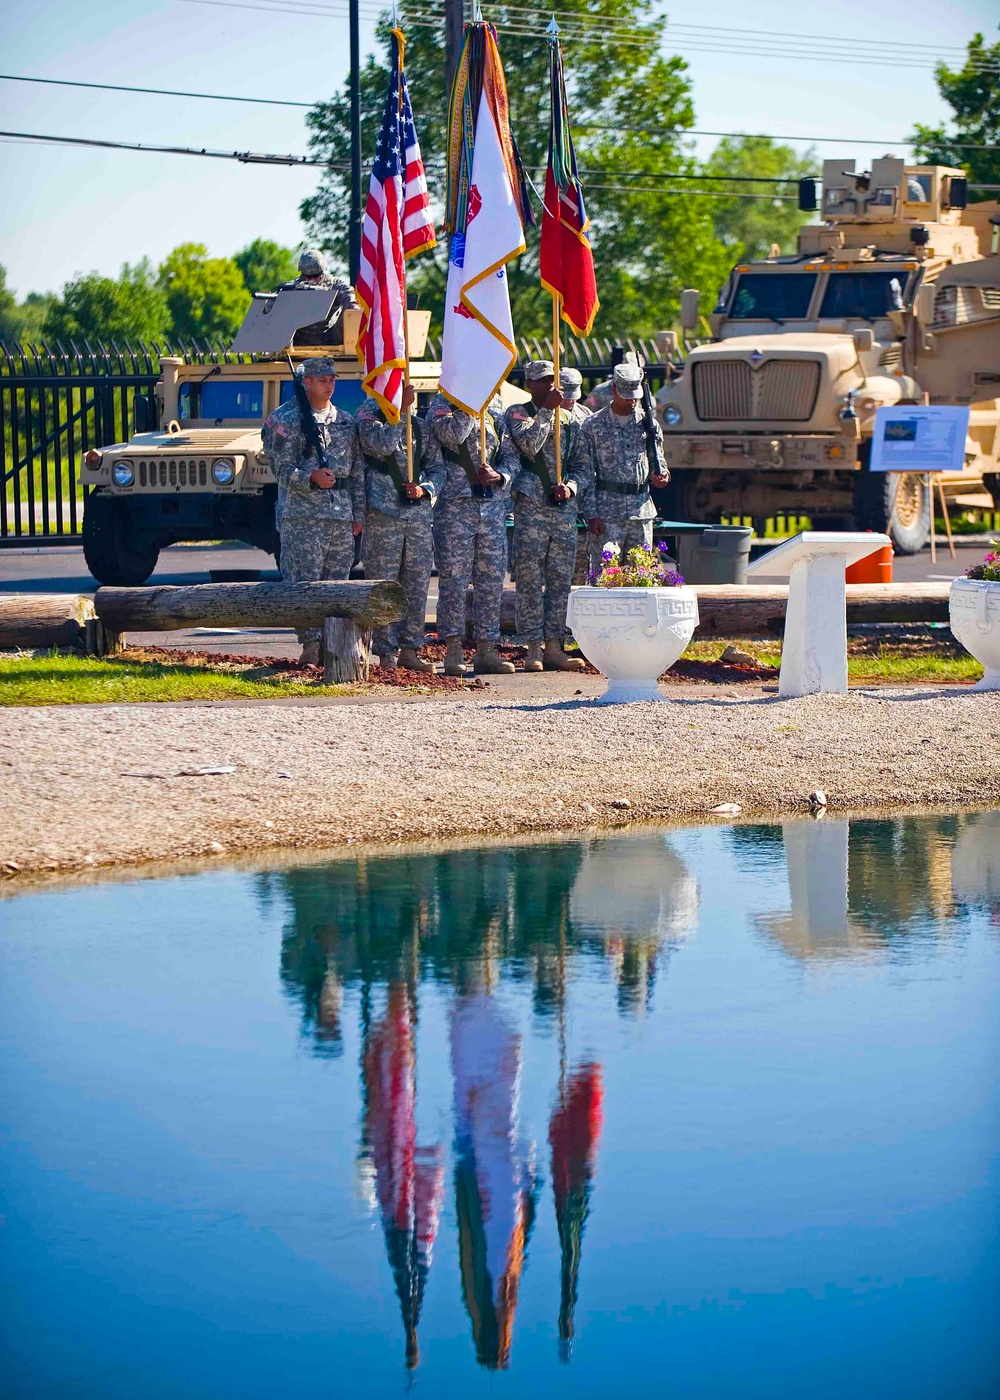 The 205th Infantry Brigade, First Army Division East Color Guard stands posted during the brigade's change-of-command ceremony held at the Veteran's Memorial, Camp Atterbury Joint Maneuver Training Center in central Indiana June 30.